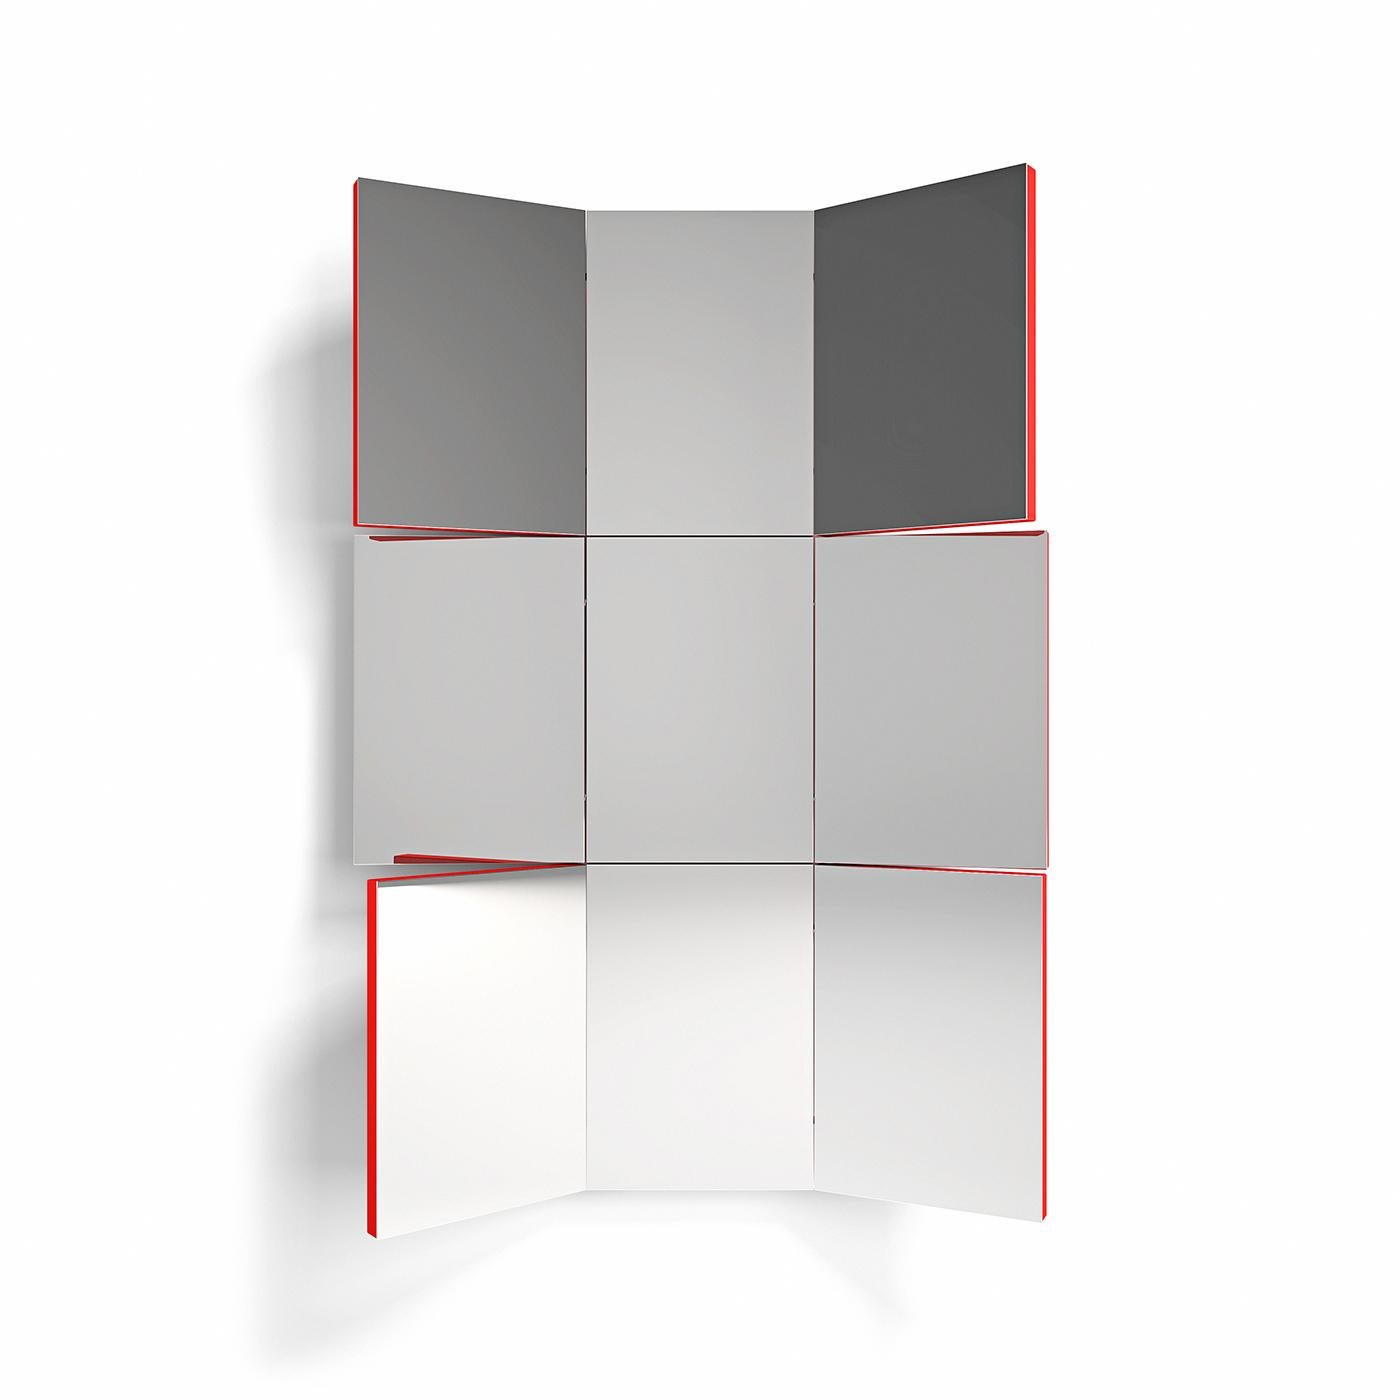 This leading-edge mirror flaunts a smart aesthetic that elevates it to a contemporary artwork. The red-lacquered wooden structure is linked to the nine rotating panels crafted of stainless steel and made perfectly reflective thanks to a uniform,